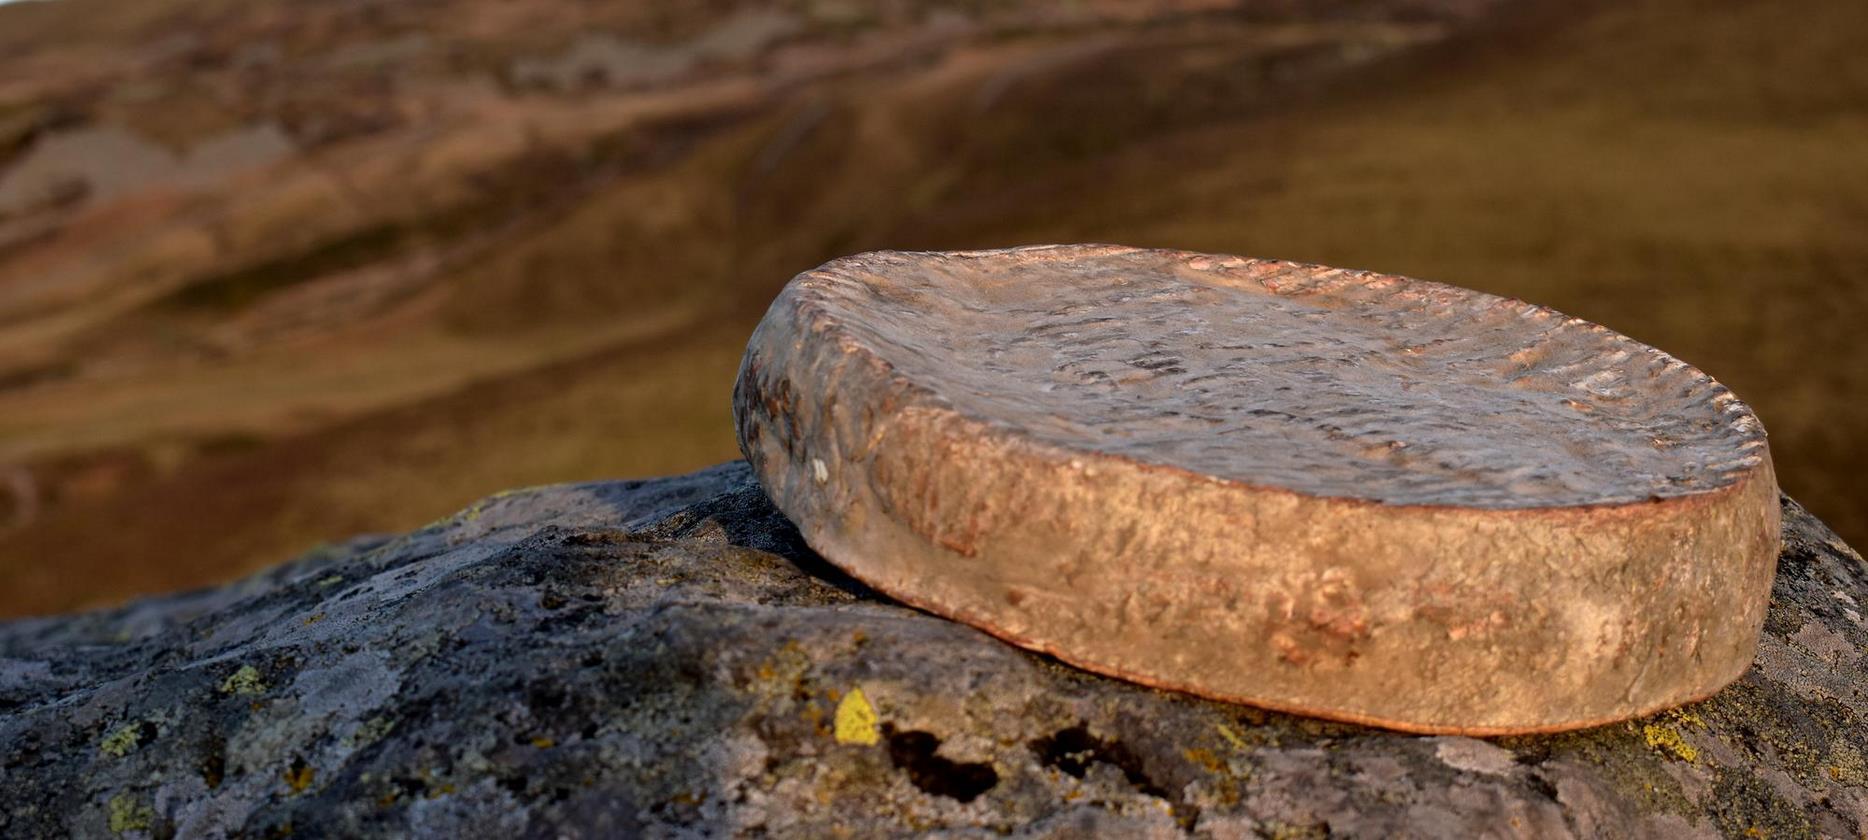 Saint Nectaire - famous cheese from the Saint Nectaire appellation